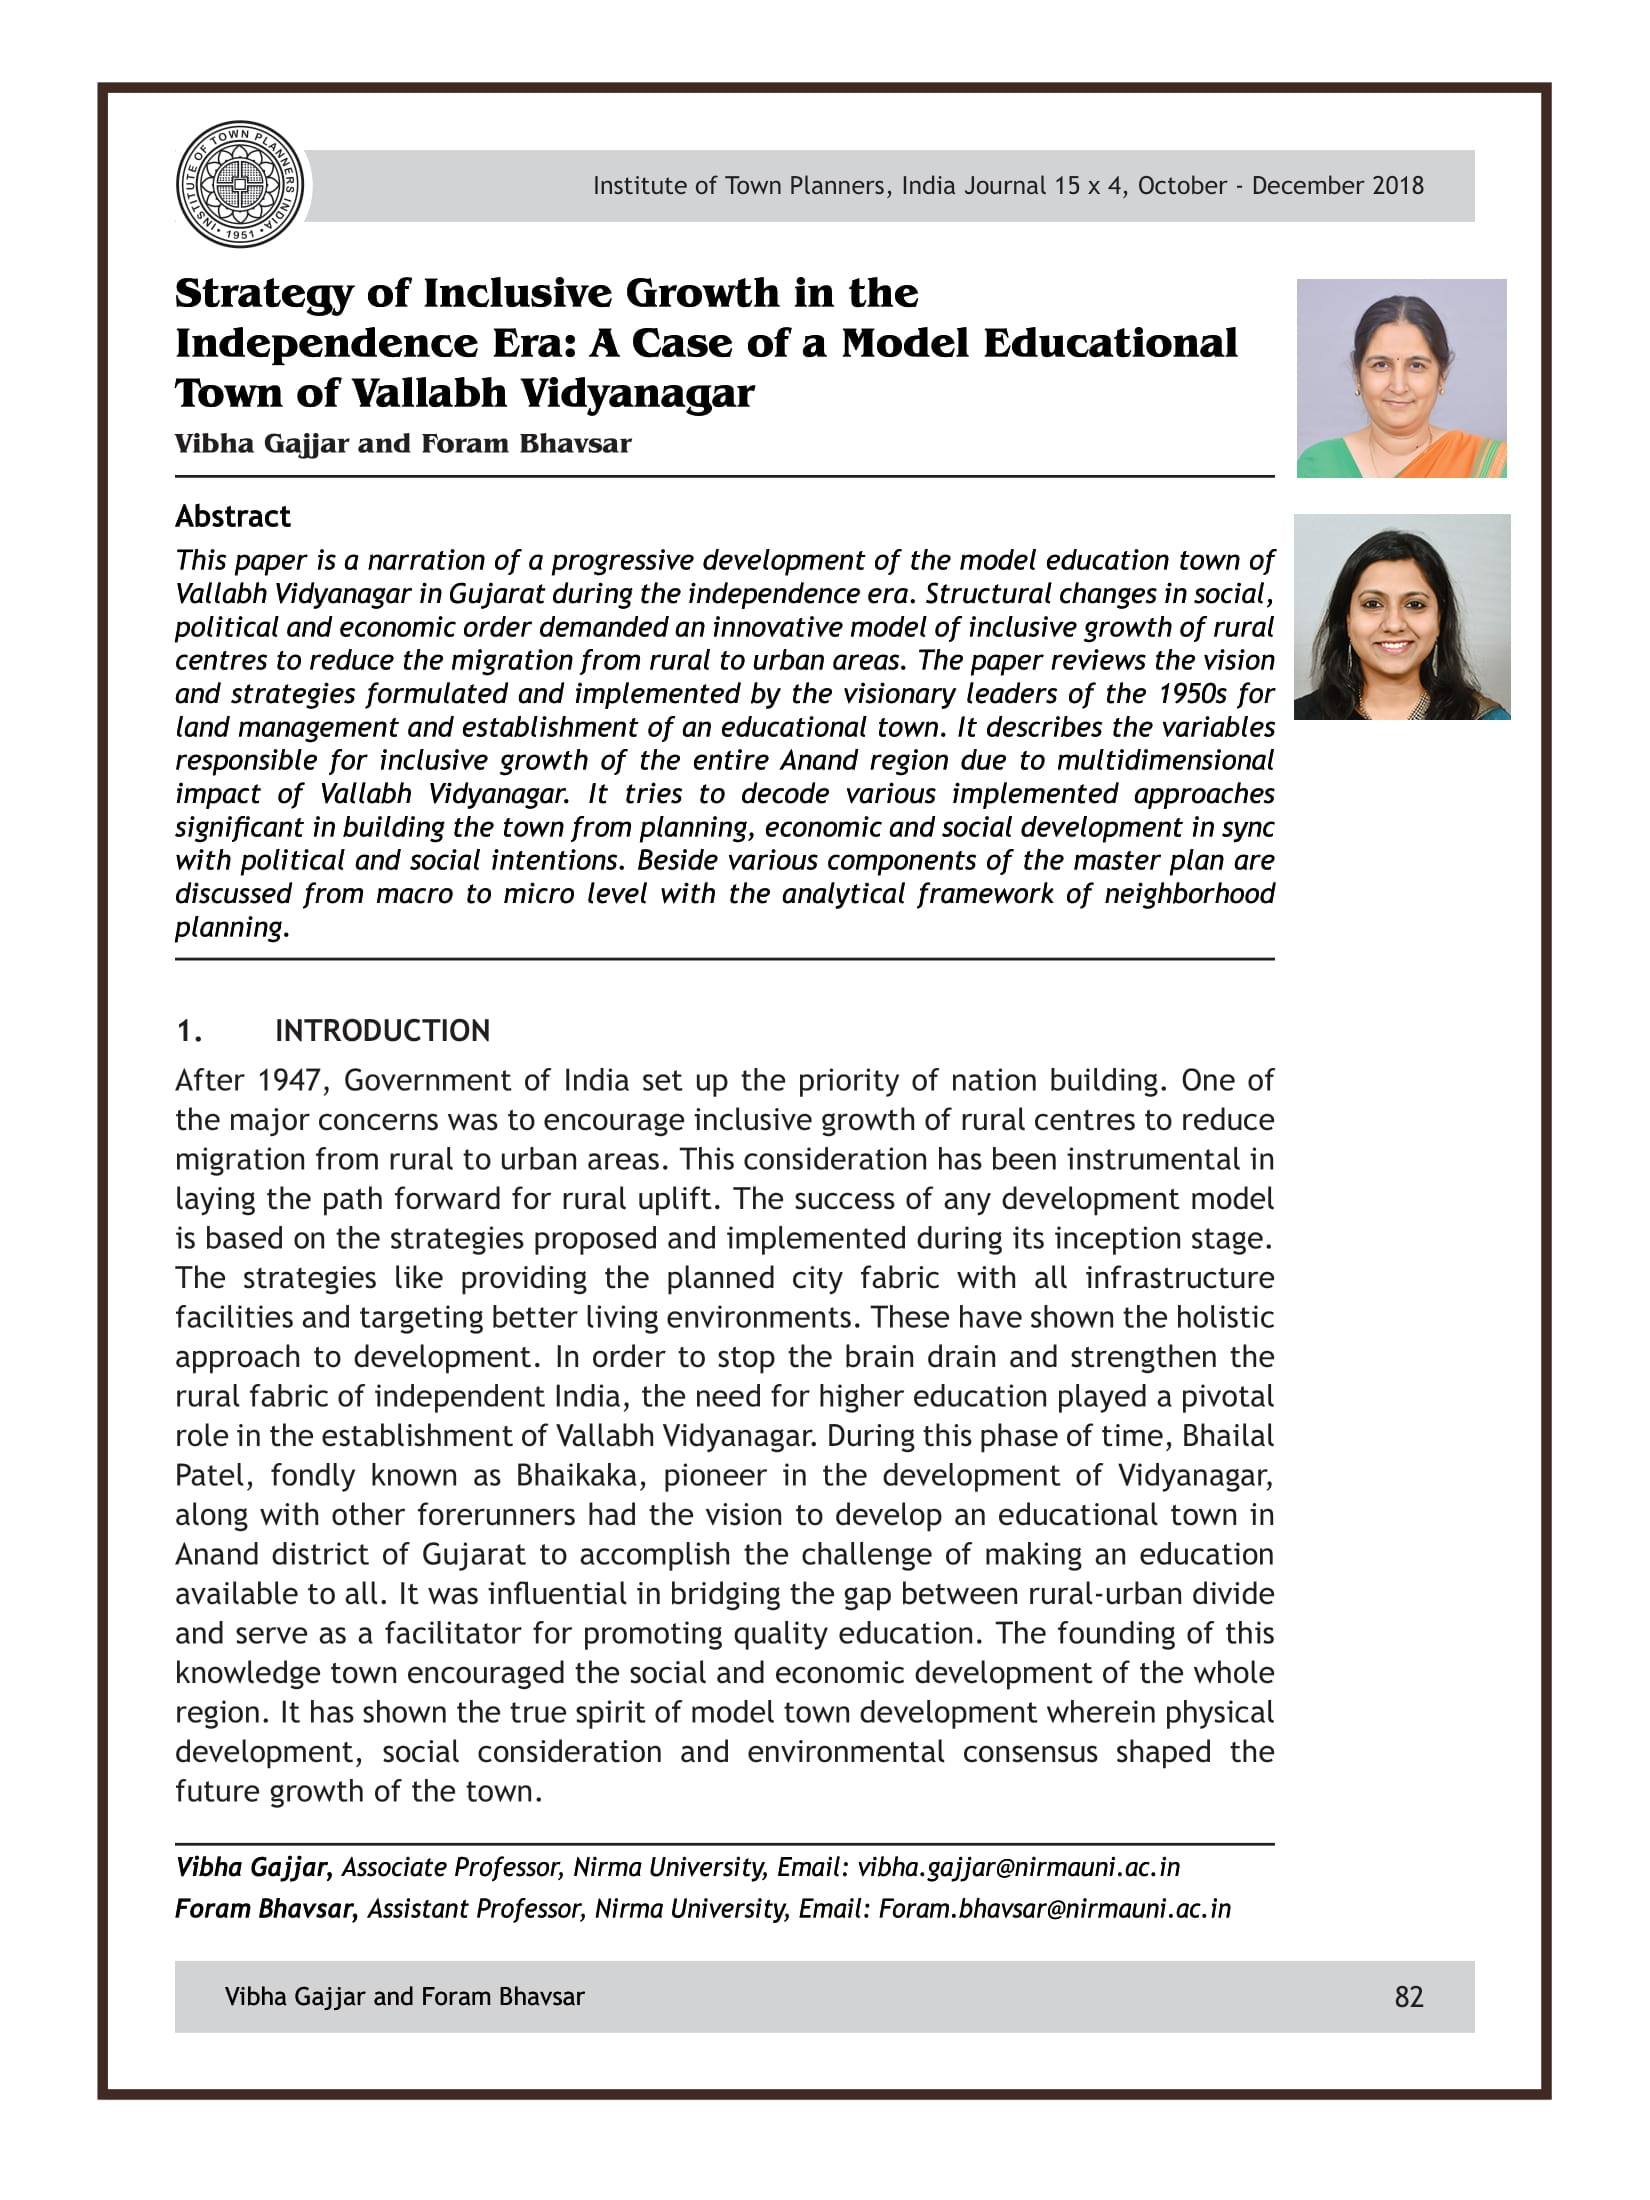 Strategy of Inclusive Growth in the Independence Era: A Case of a Model Educational Town of Vallabh Vidyanagar